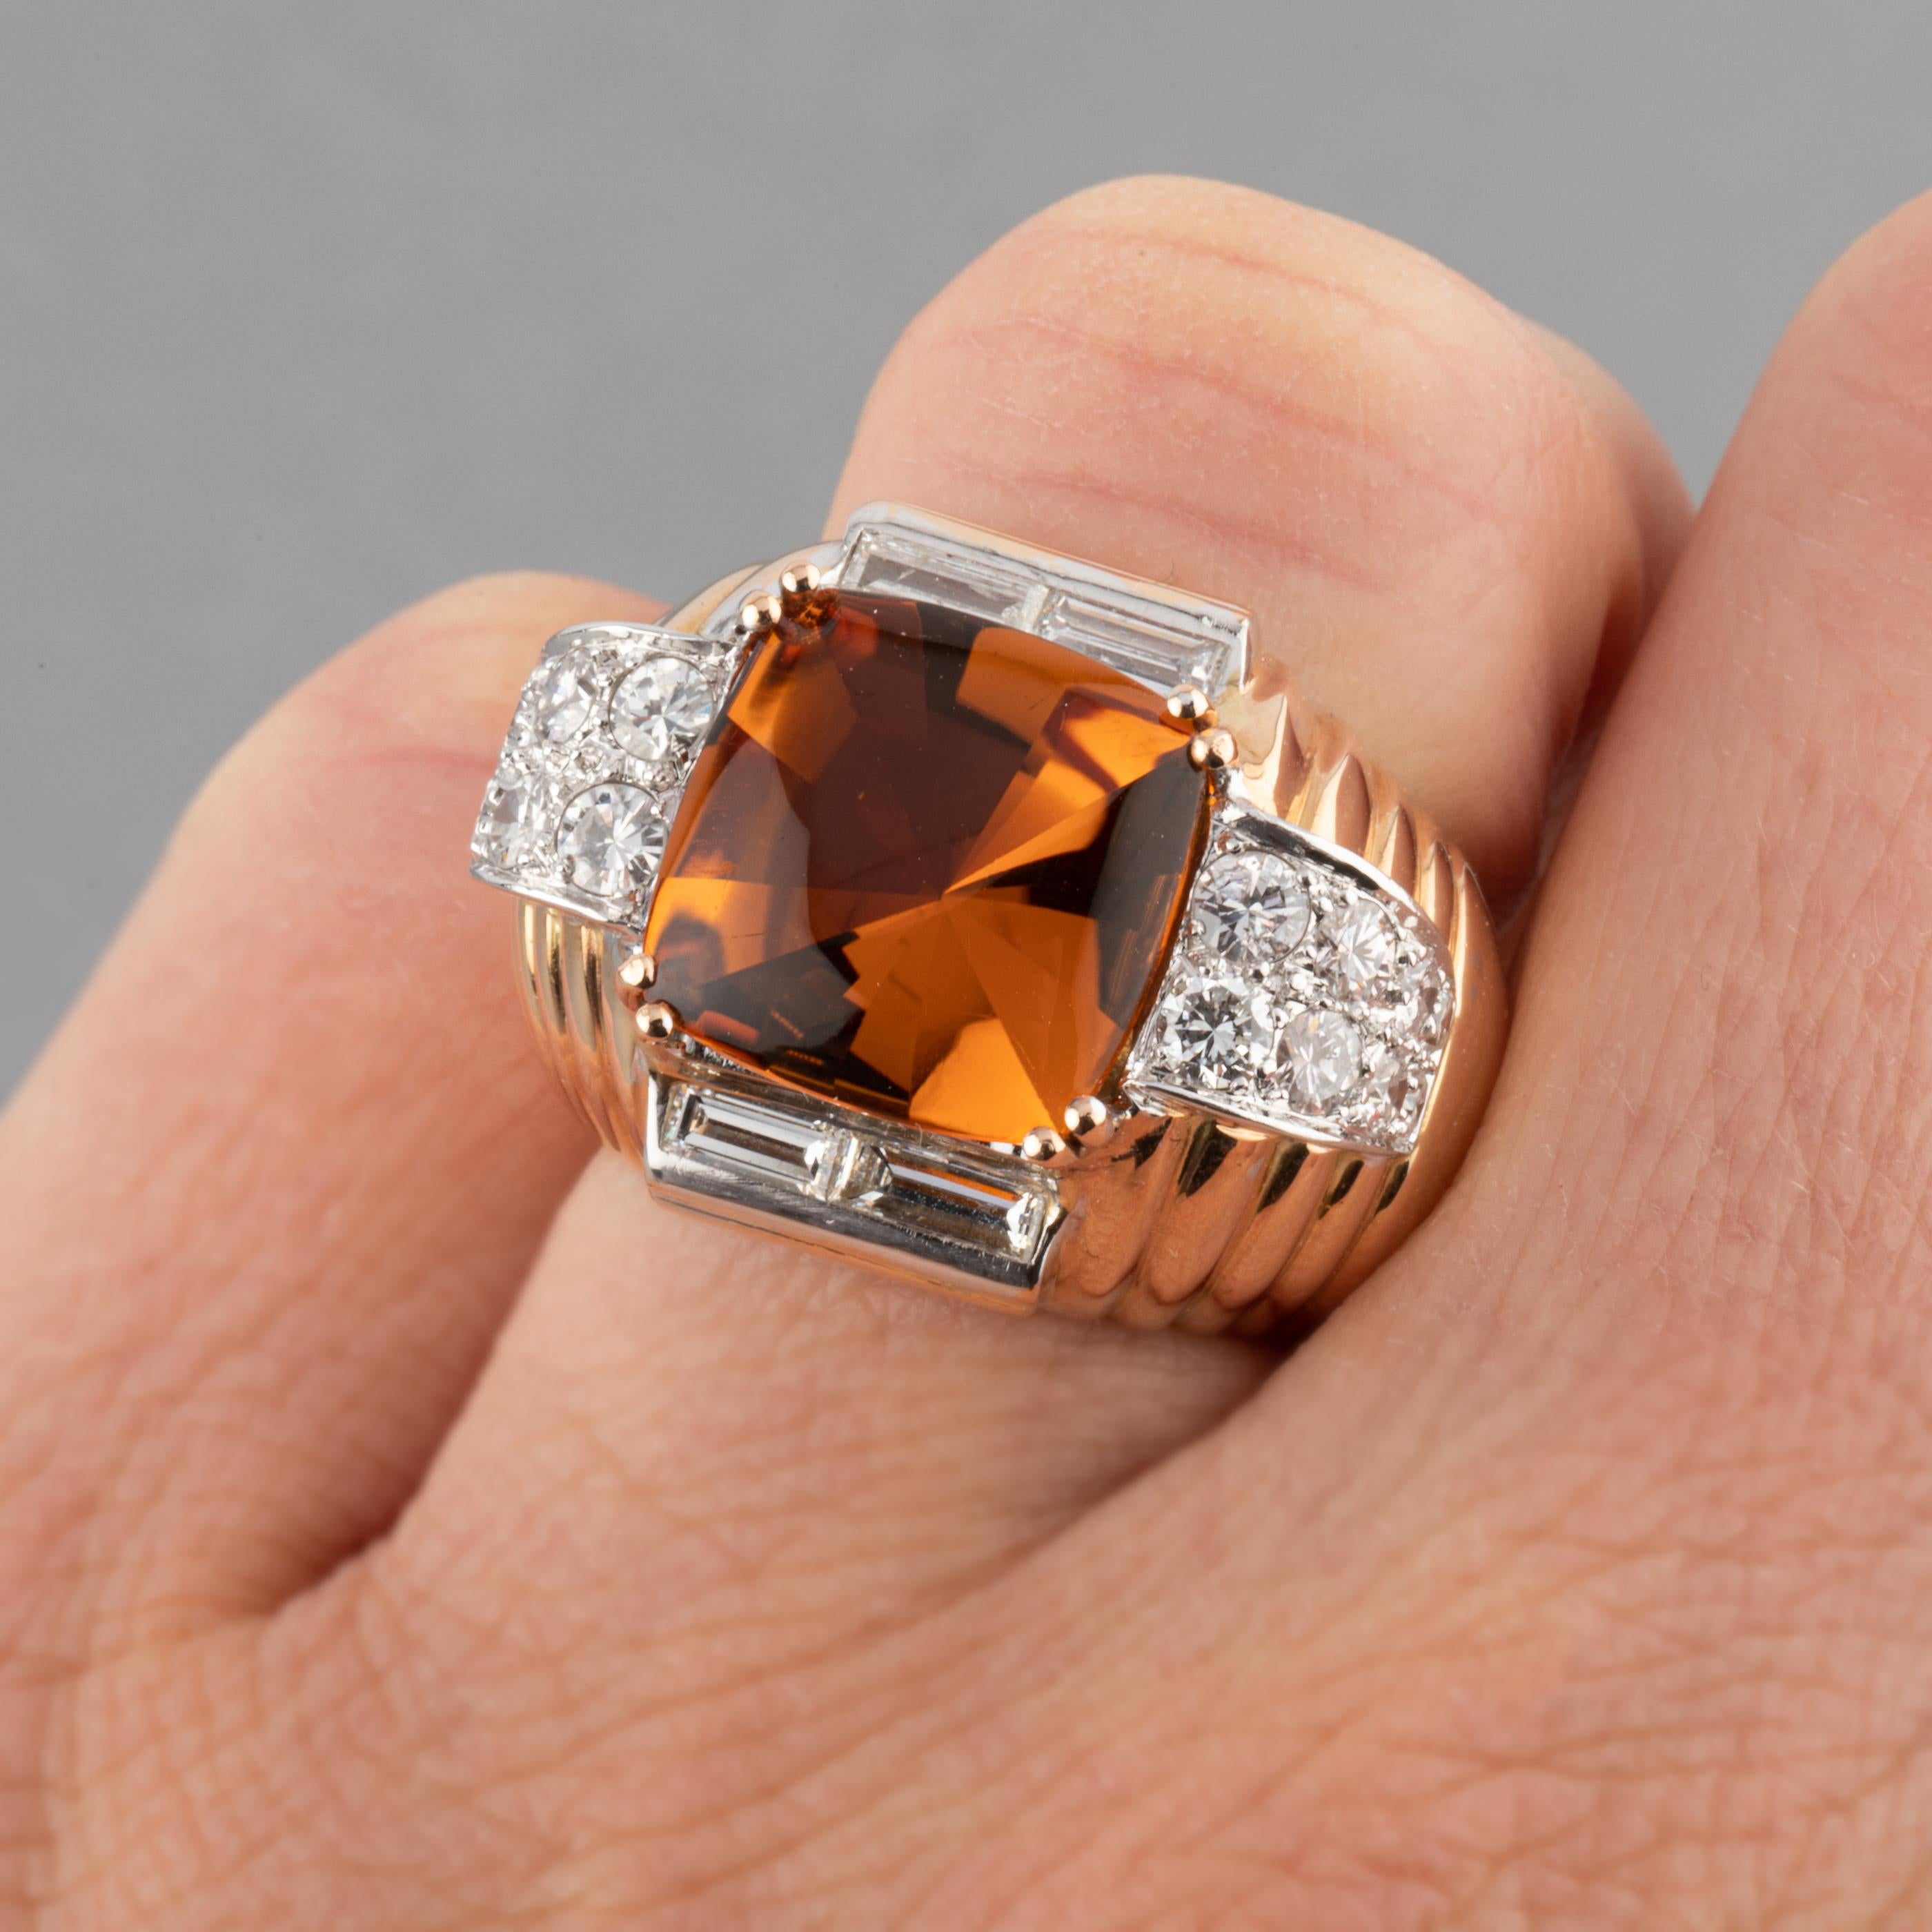 Elegant Ring, made in France circa 1950.
Made in yellow gold 18k and platinum, hallmarks for both (eagle and dog), mark of the maker.
Set with diamonds and a citrine. The citrine measures 12*13 mm. the diamonds weight 0.80 carat